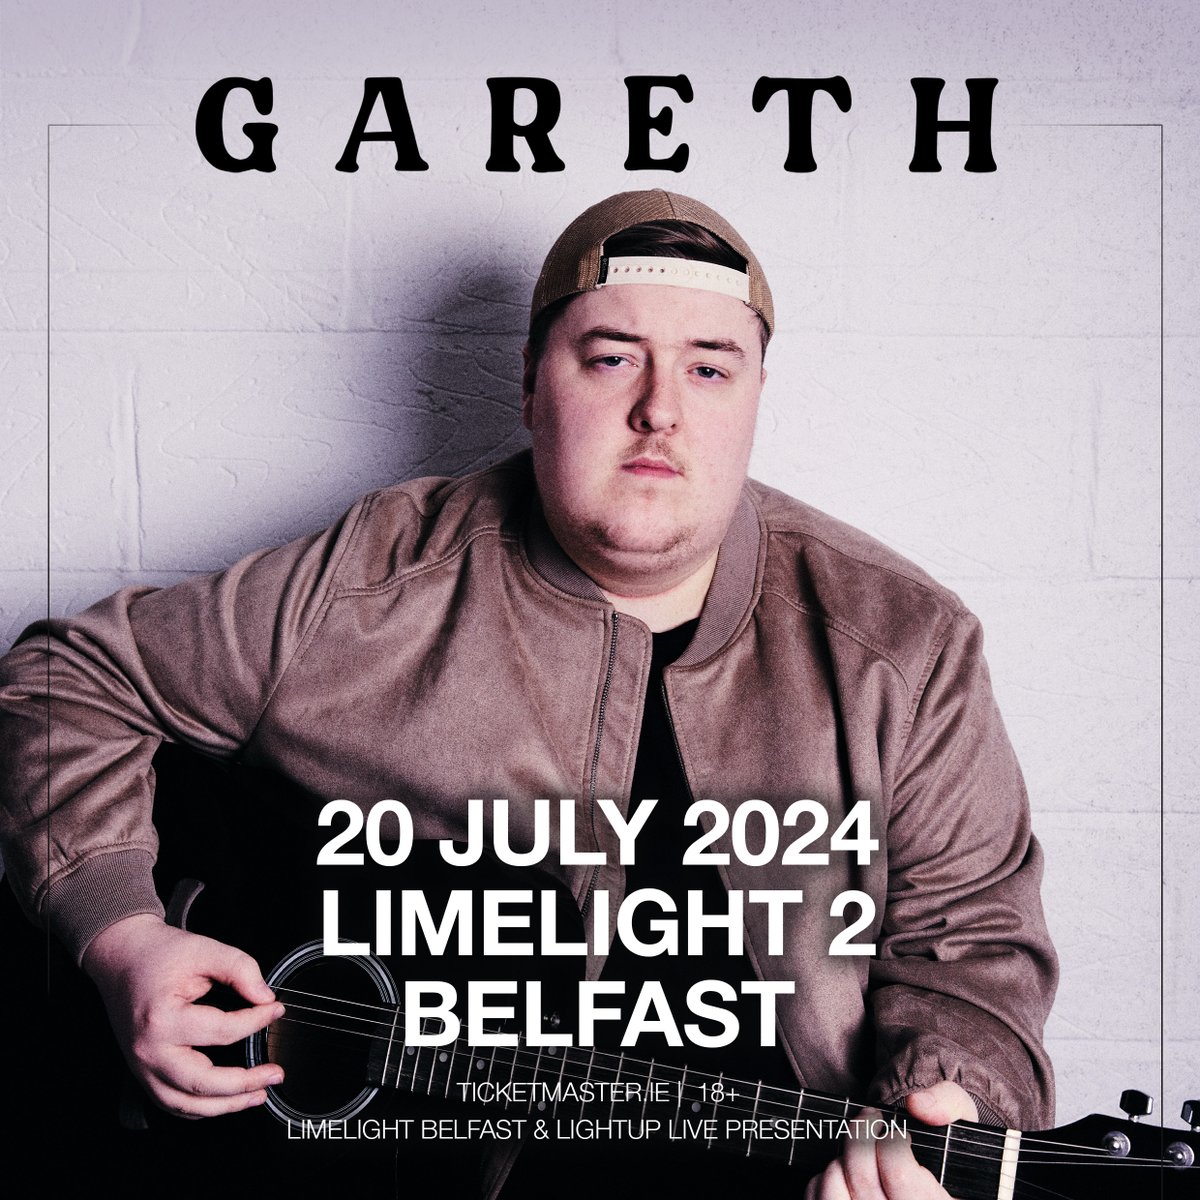 🎶 Singer Songwriter Gareth is set for The Limelight on 20th July! 🎫 Tickets are on sale Wed at 10am from Ticketmaster.